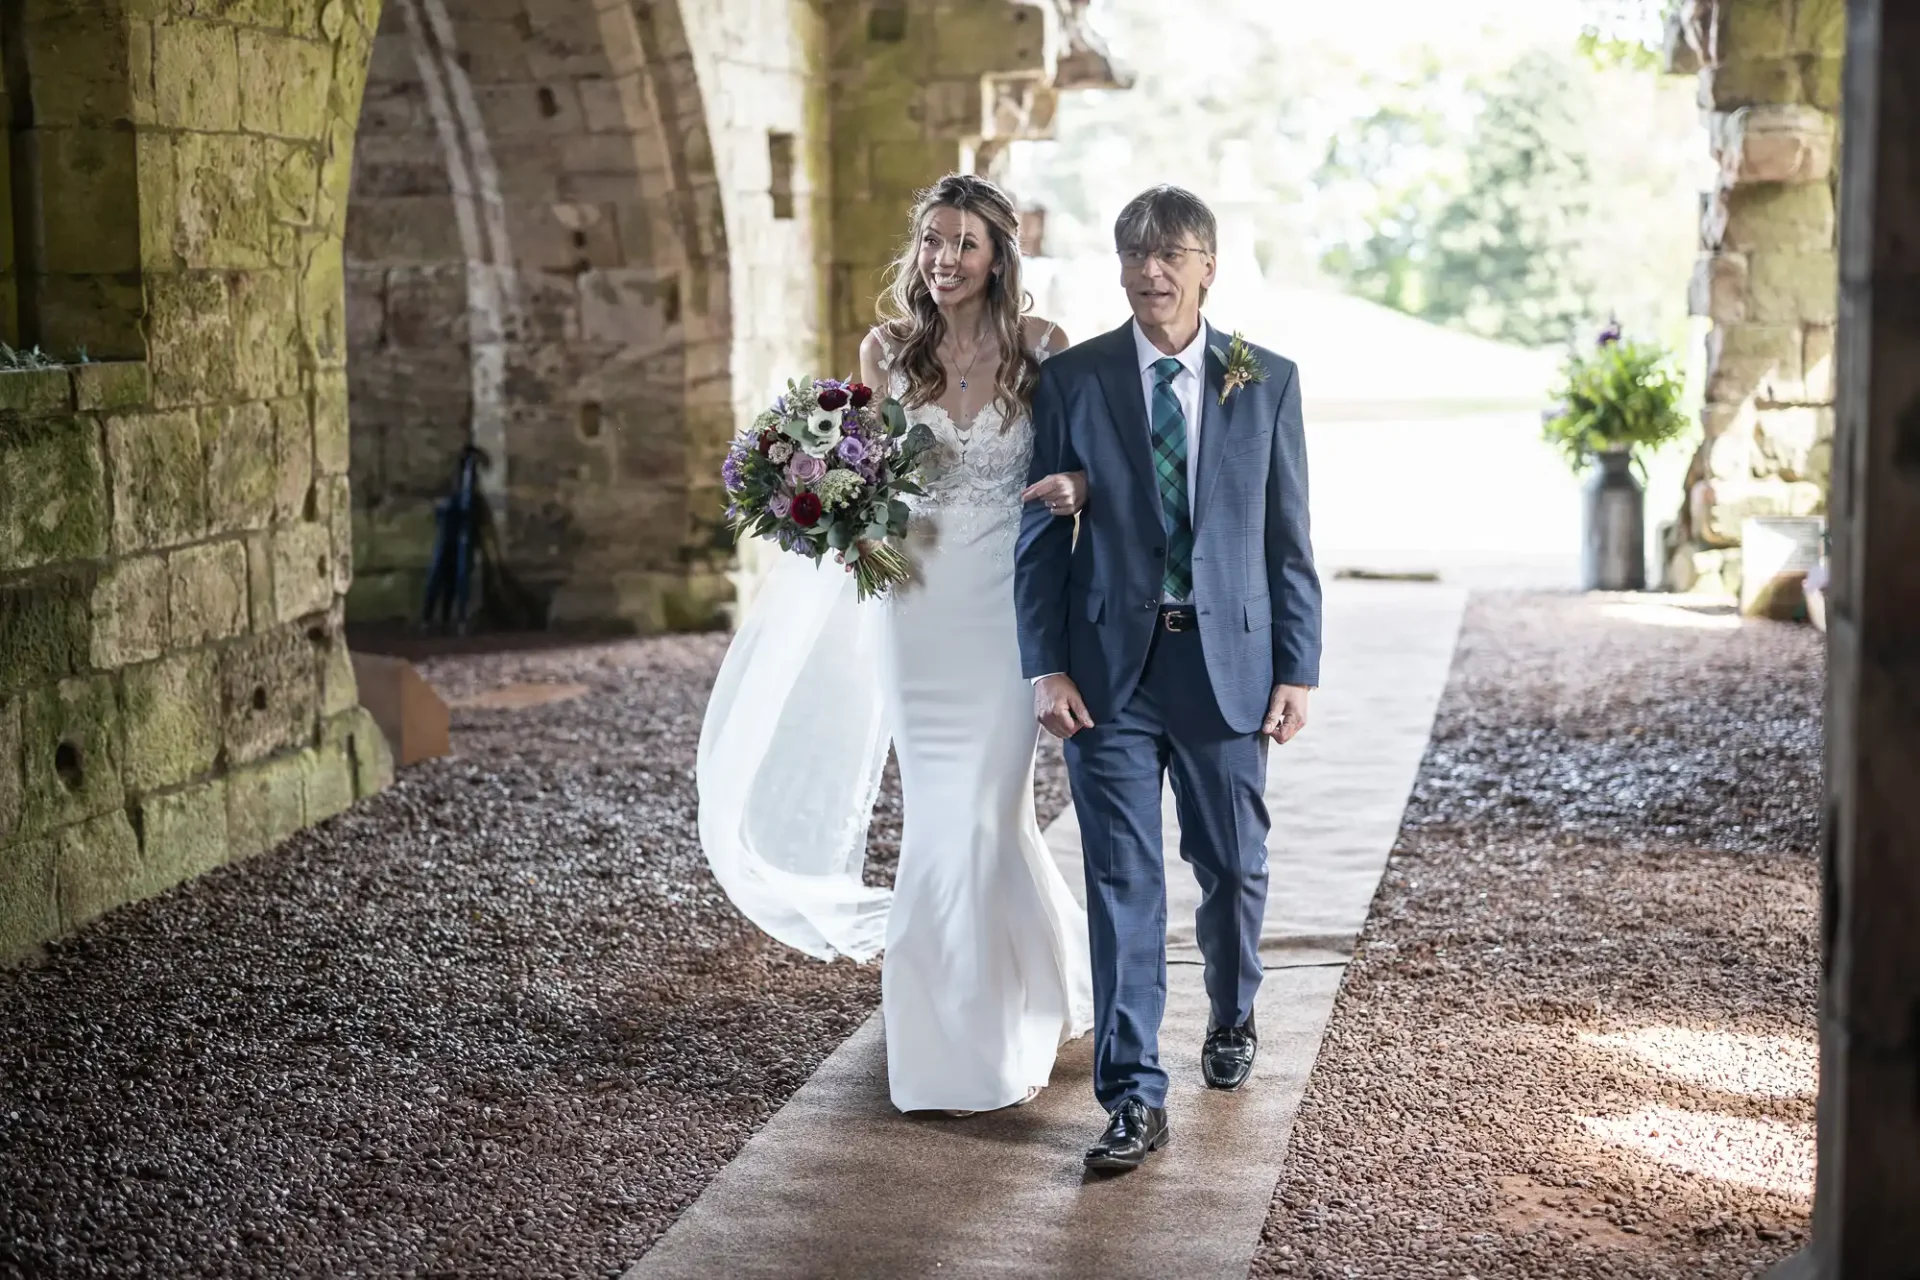 A bride holding a bouquet and an older man walk down an outdoor aisle under a stone archway. The bride wears a white gown and veil; the man is dressed in a blue suit and tie.